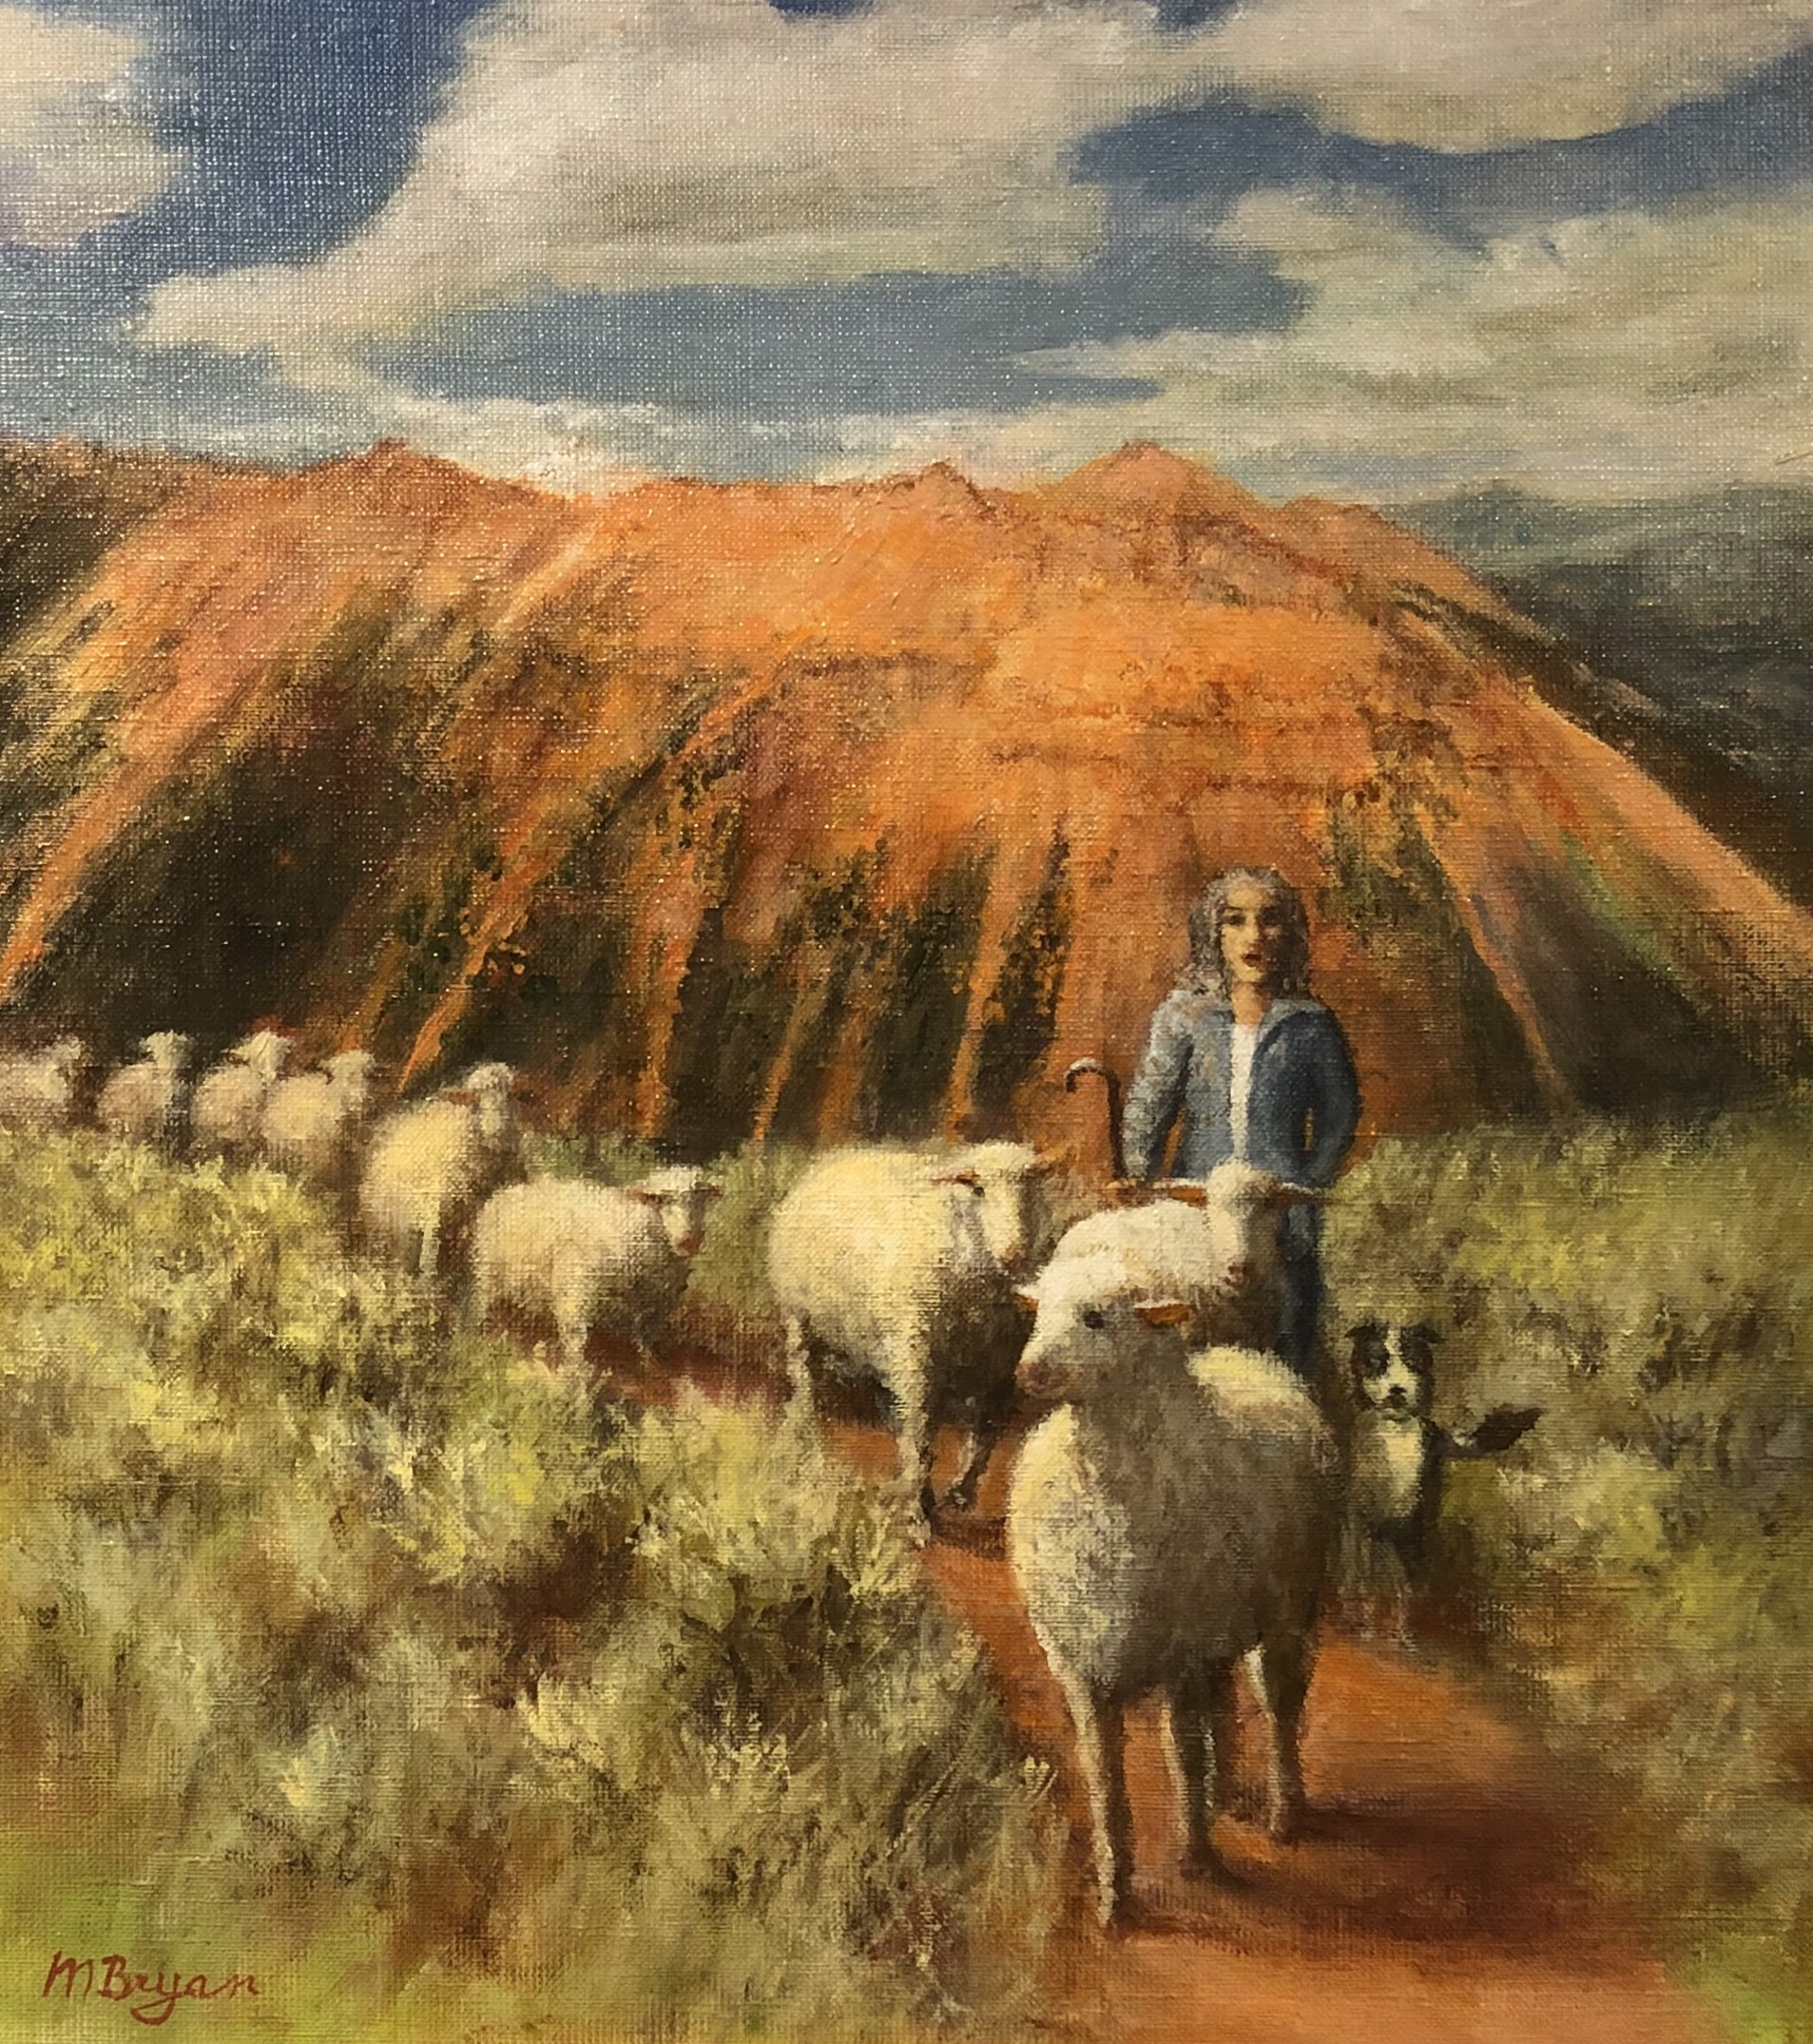 On the Way Home - Red Mountain by Malcolm Bryan